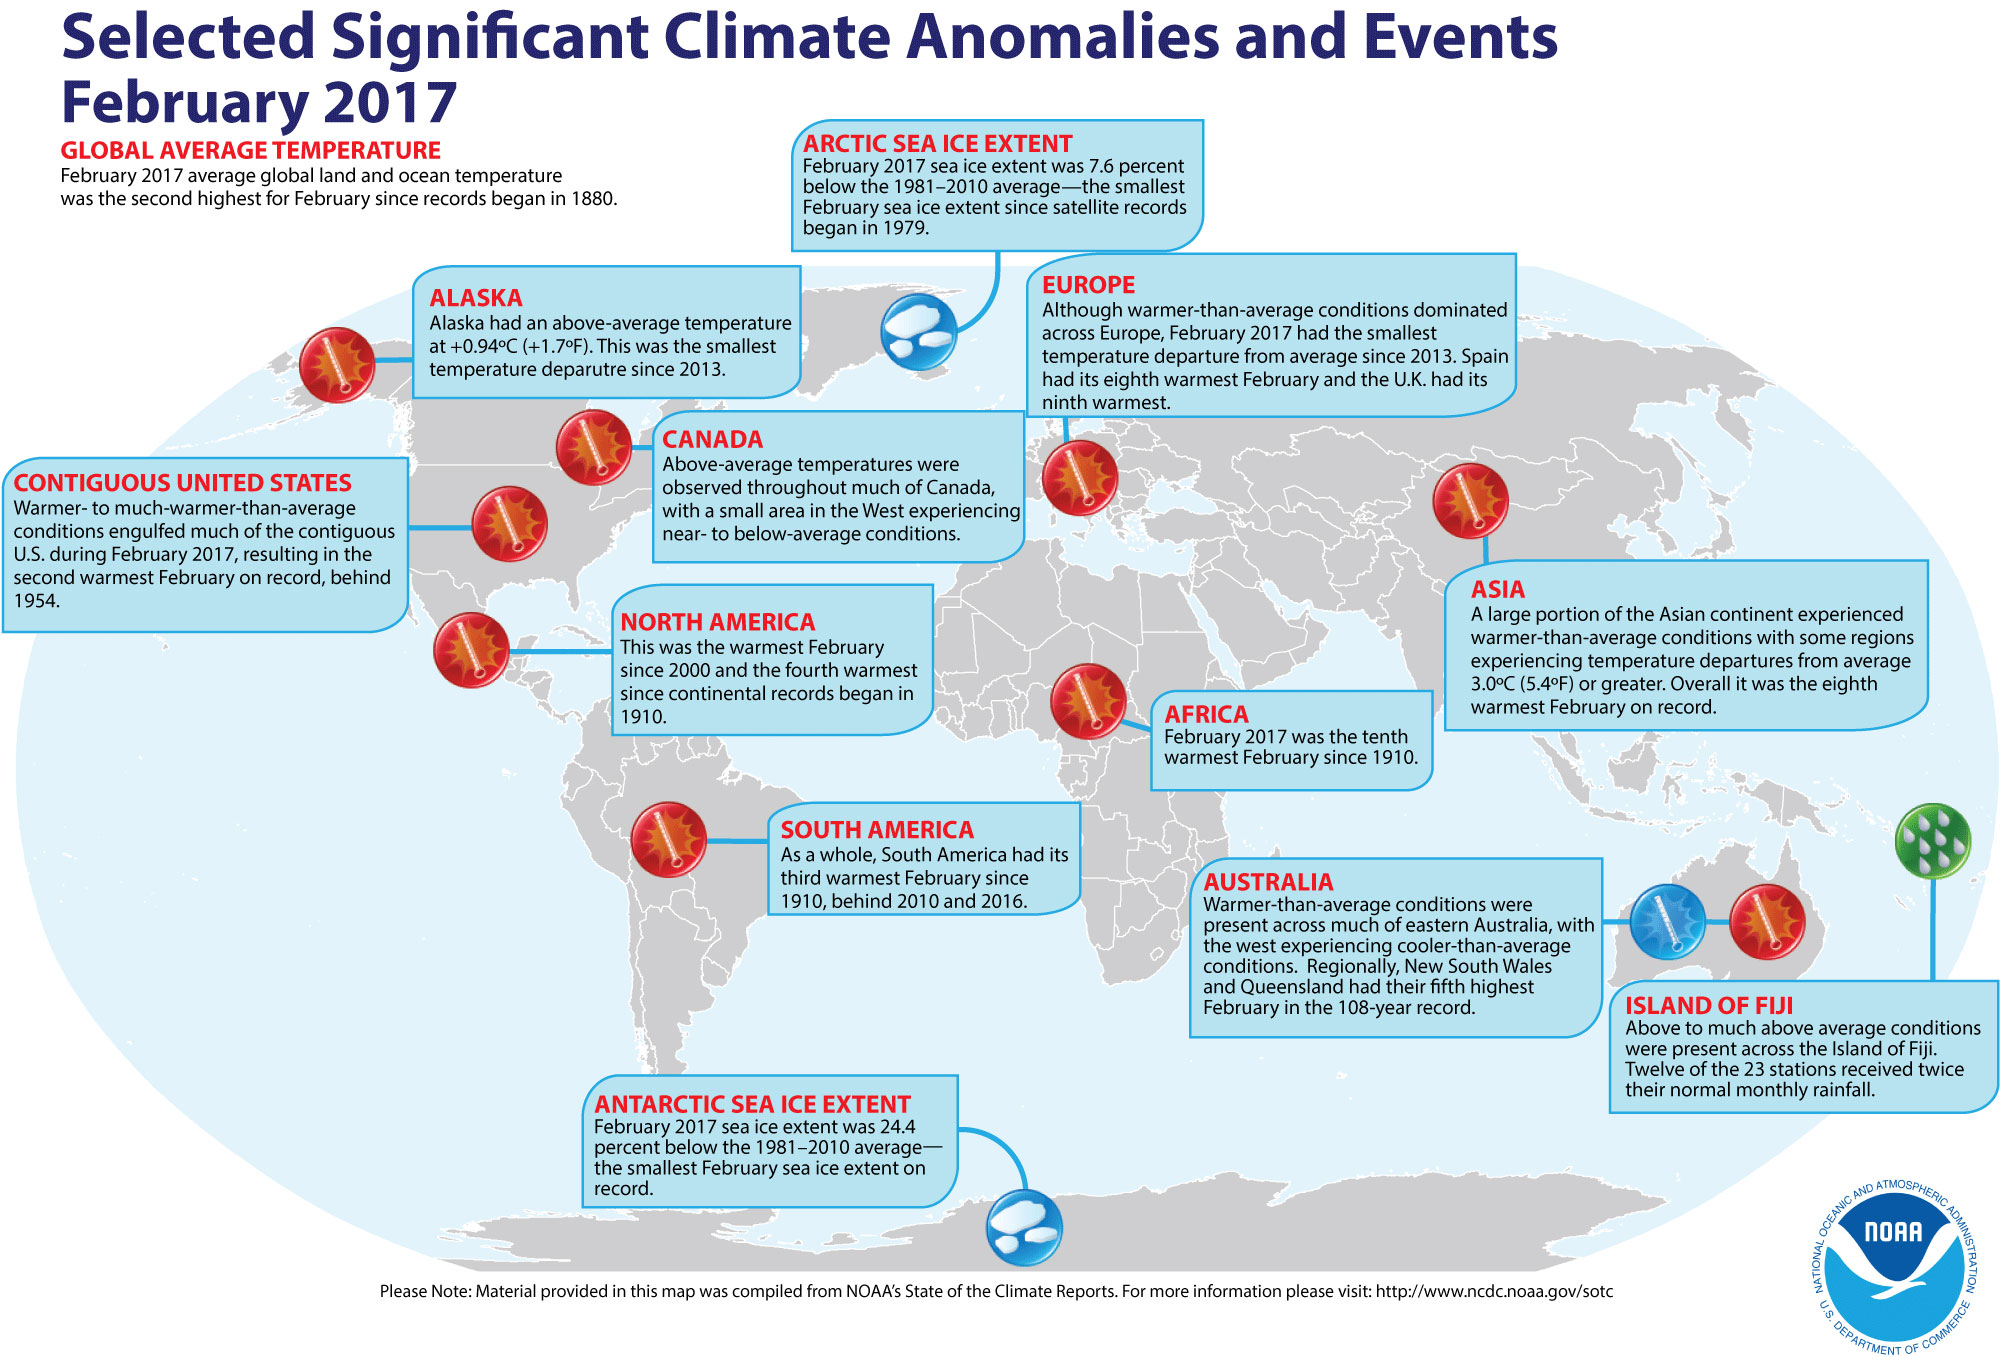 Locations of significant climate events that occurred around the world in February 2017.